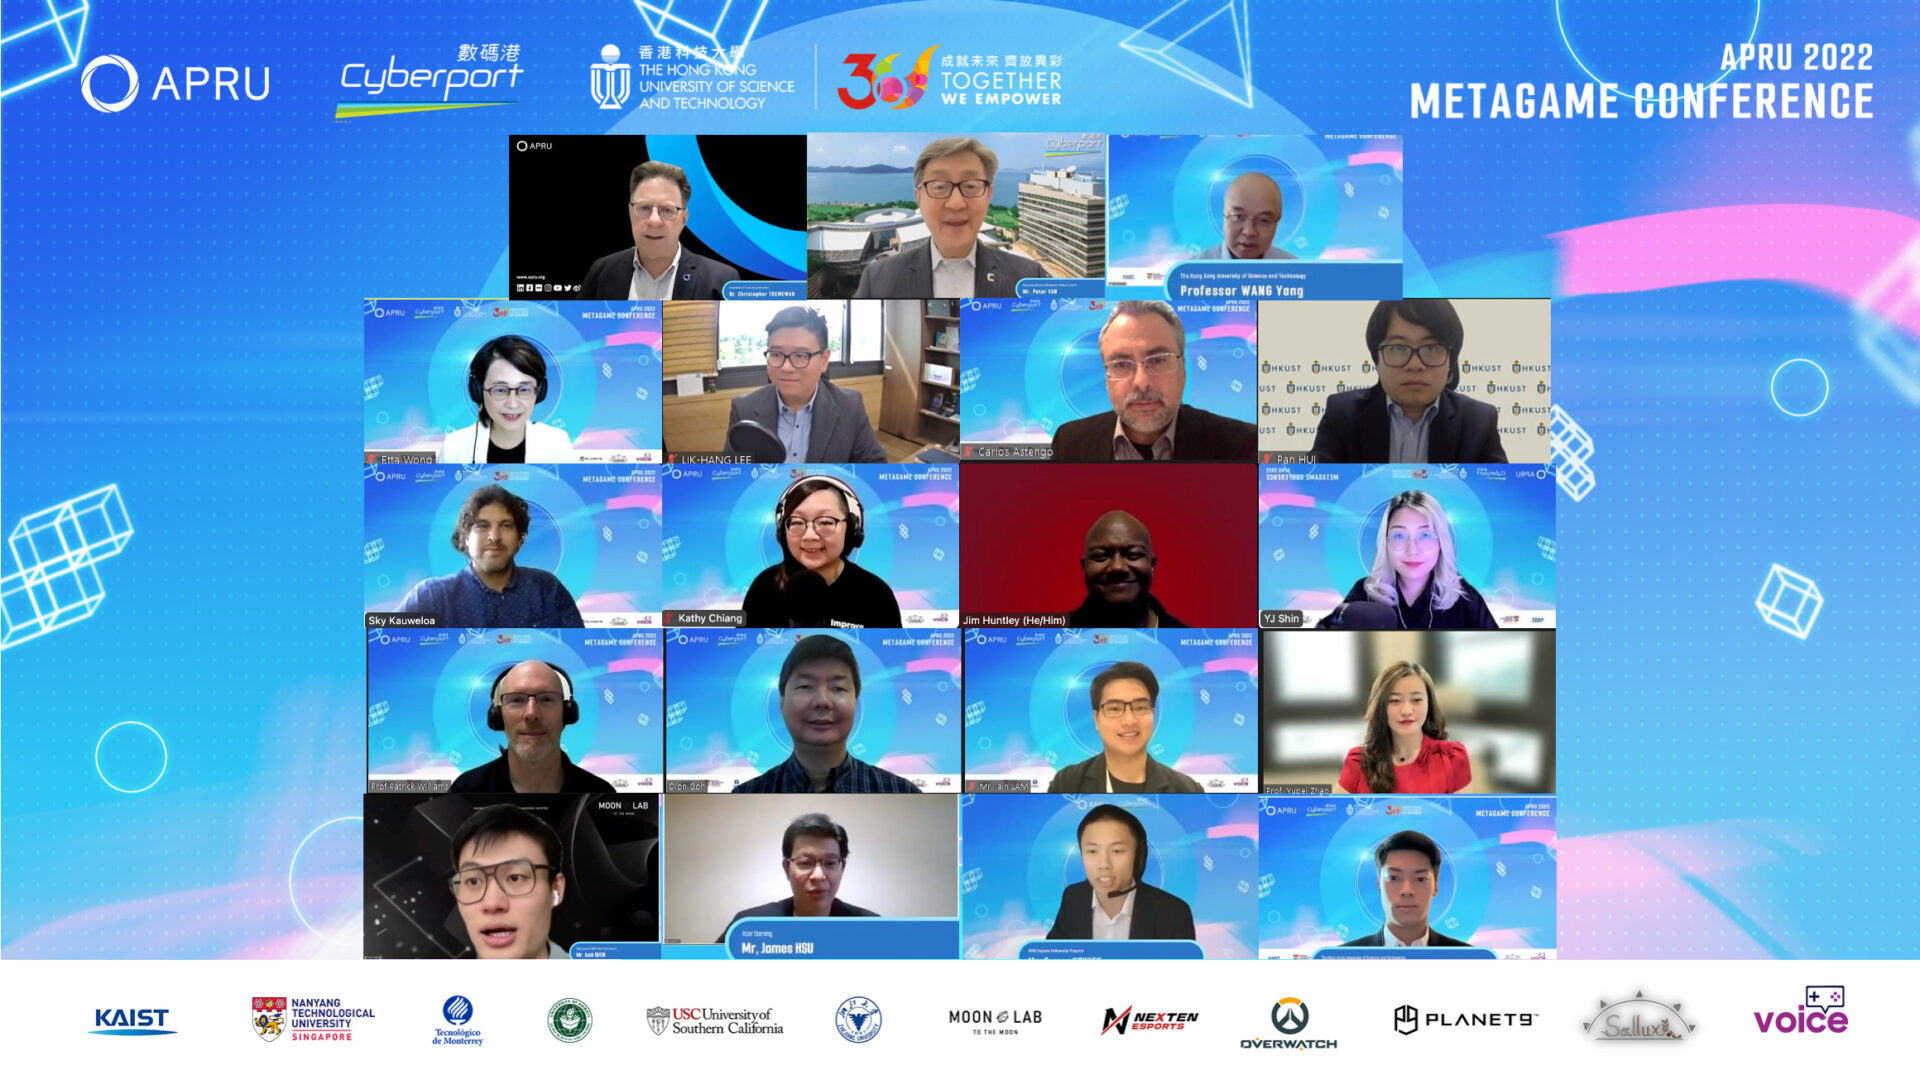 APRU - Association of Pacific Rim Universities - We are going live soon!  Join today! #APRU #MetaGame Conference Cyberport 數碼港More at www.apru- metagames.org